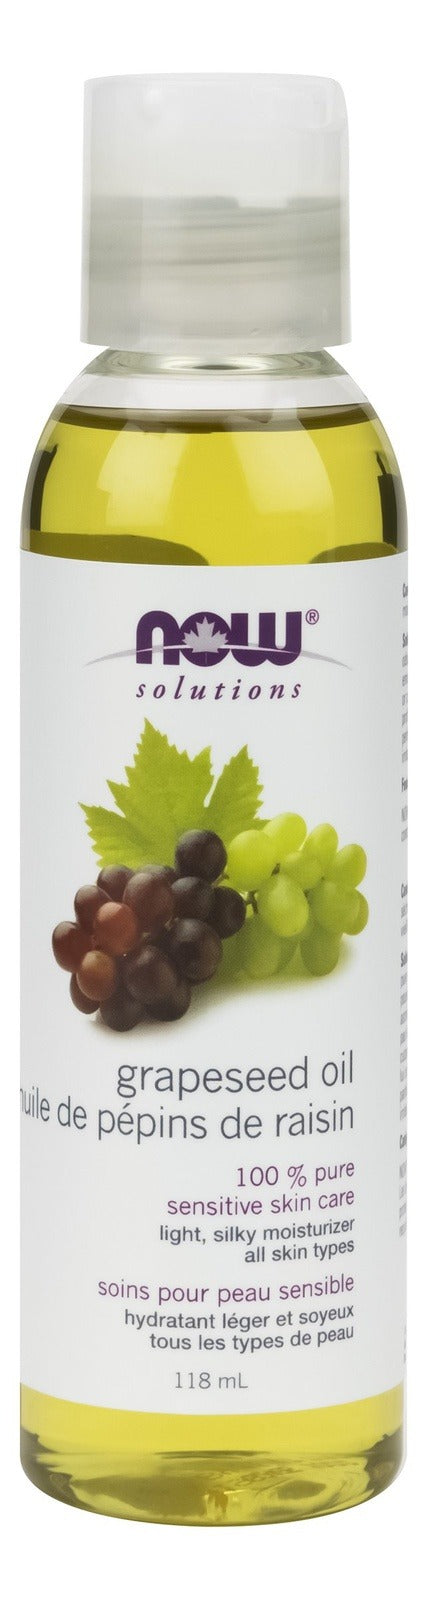 NOW Grapeseed Oil 118 mL Image 1